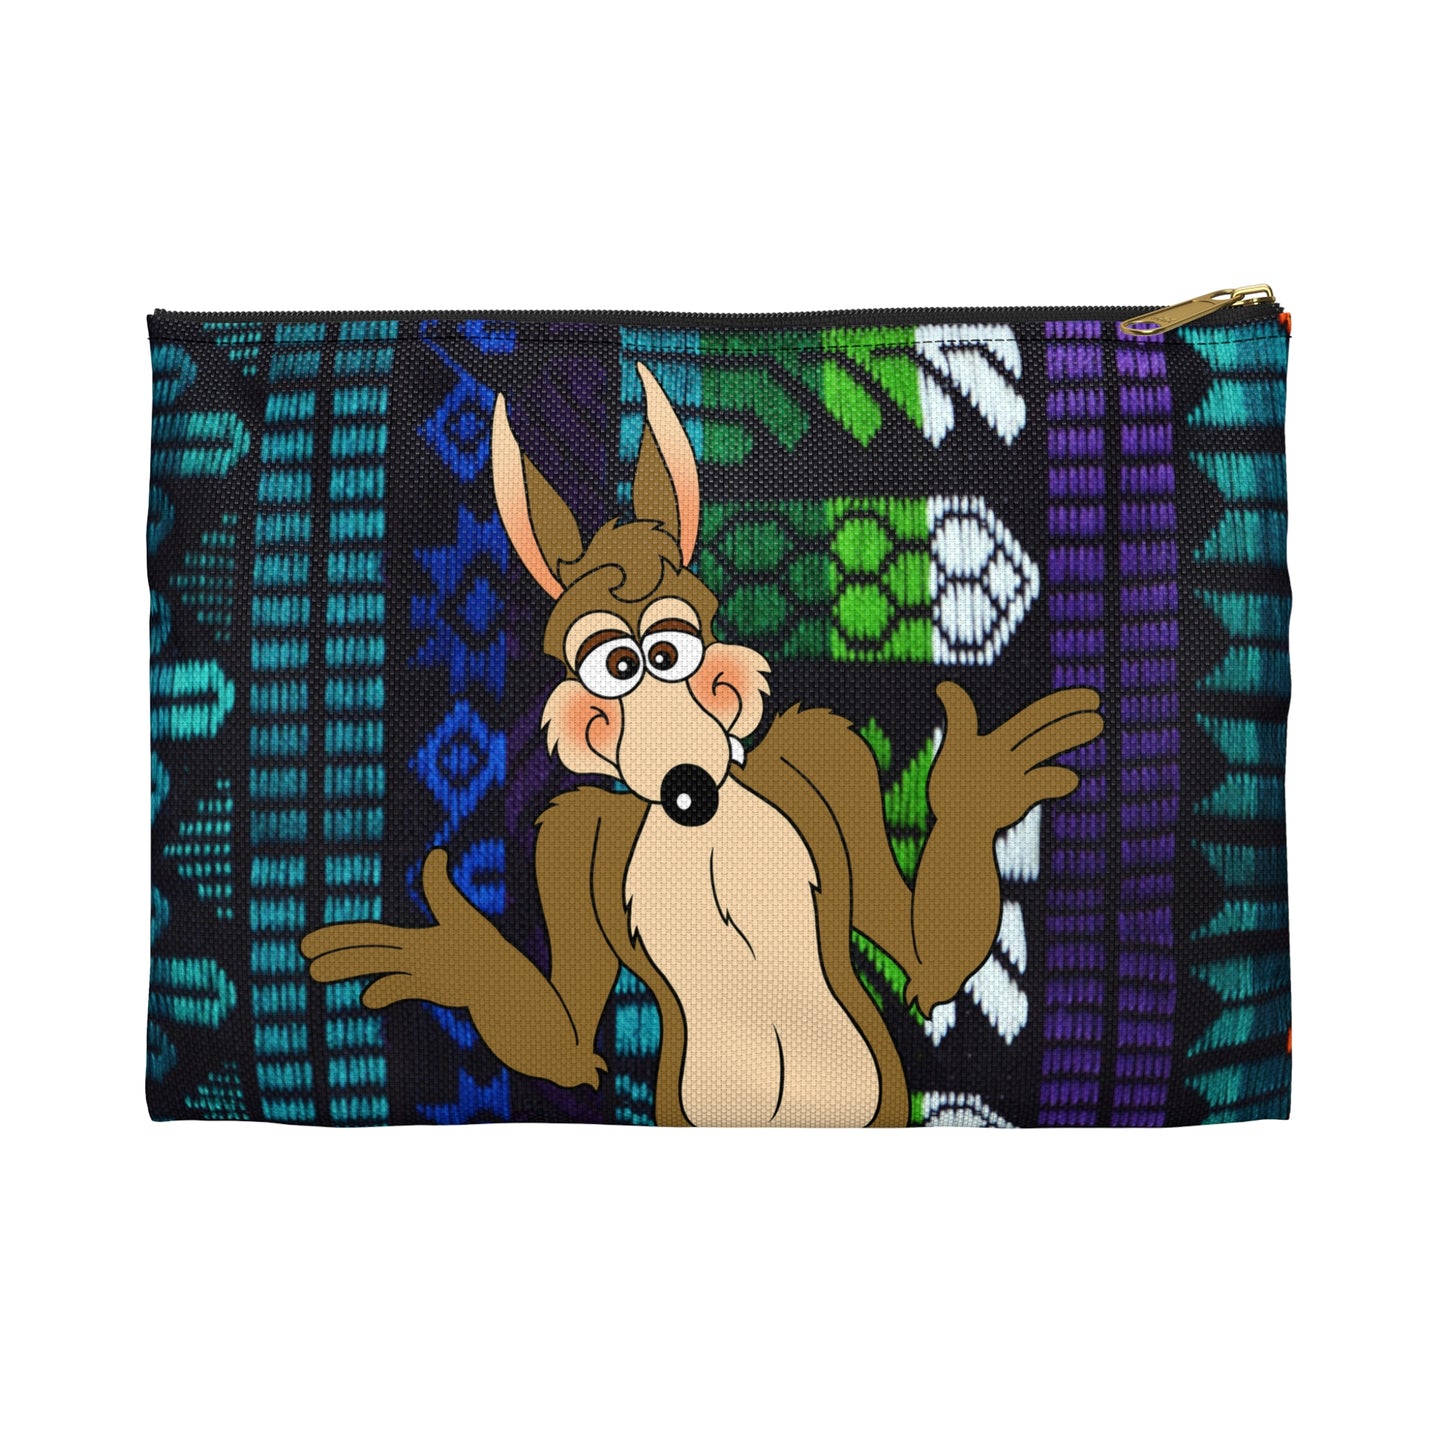 A Pack of Lies Accessory Pouch